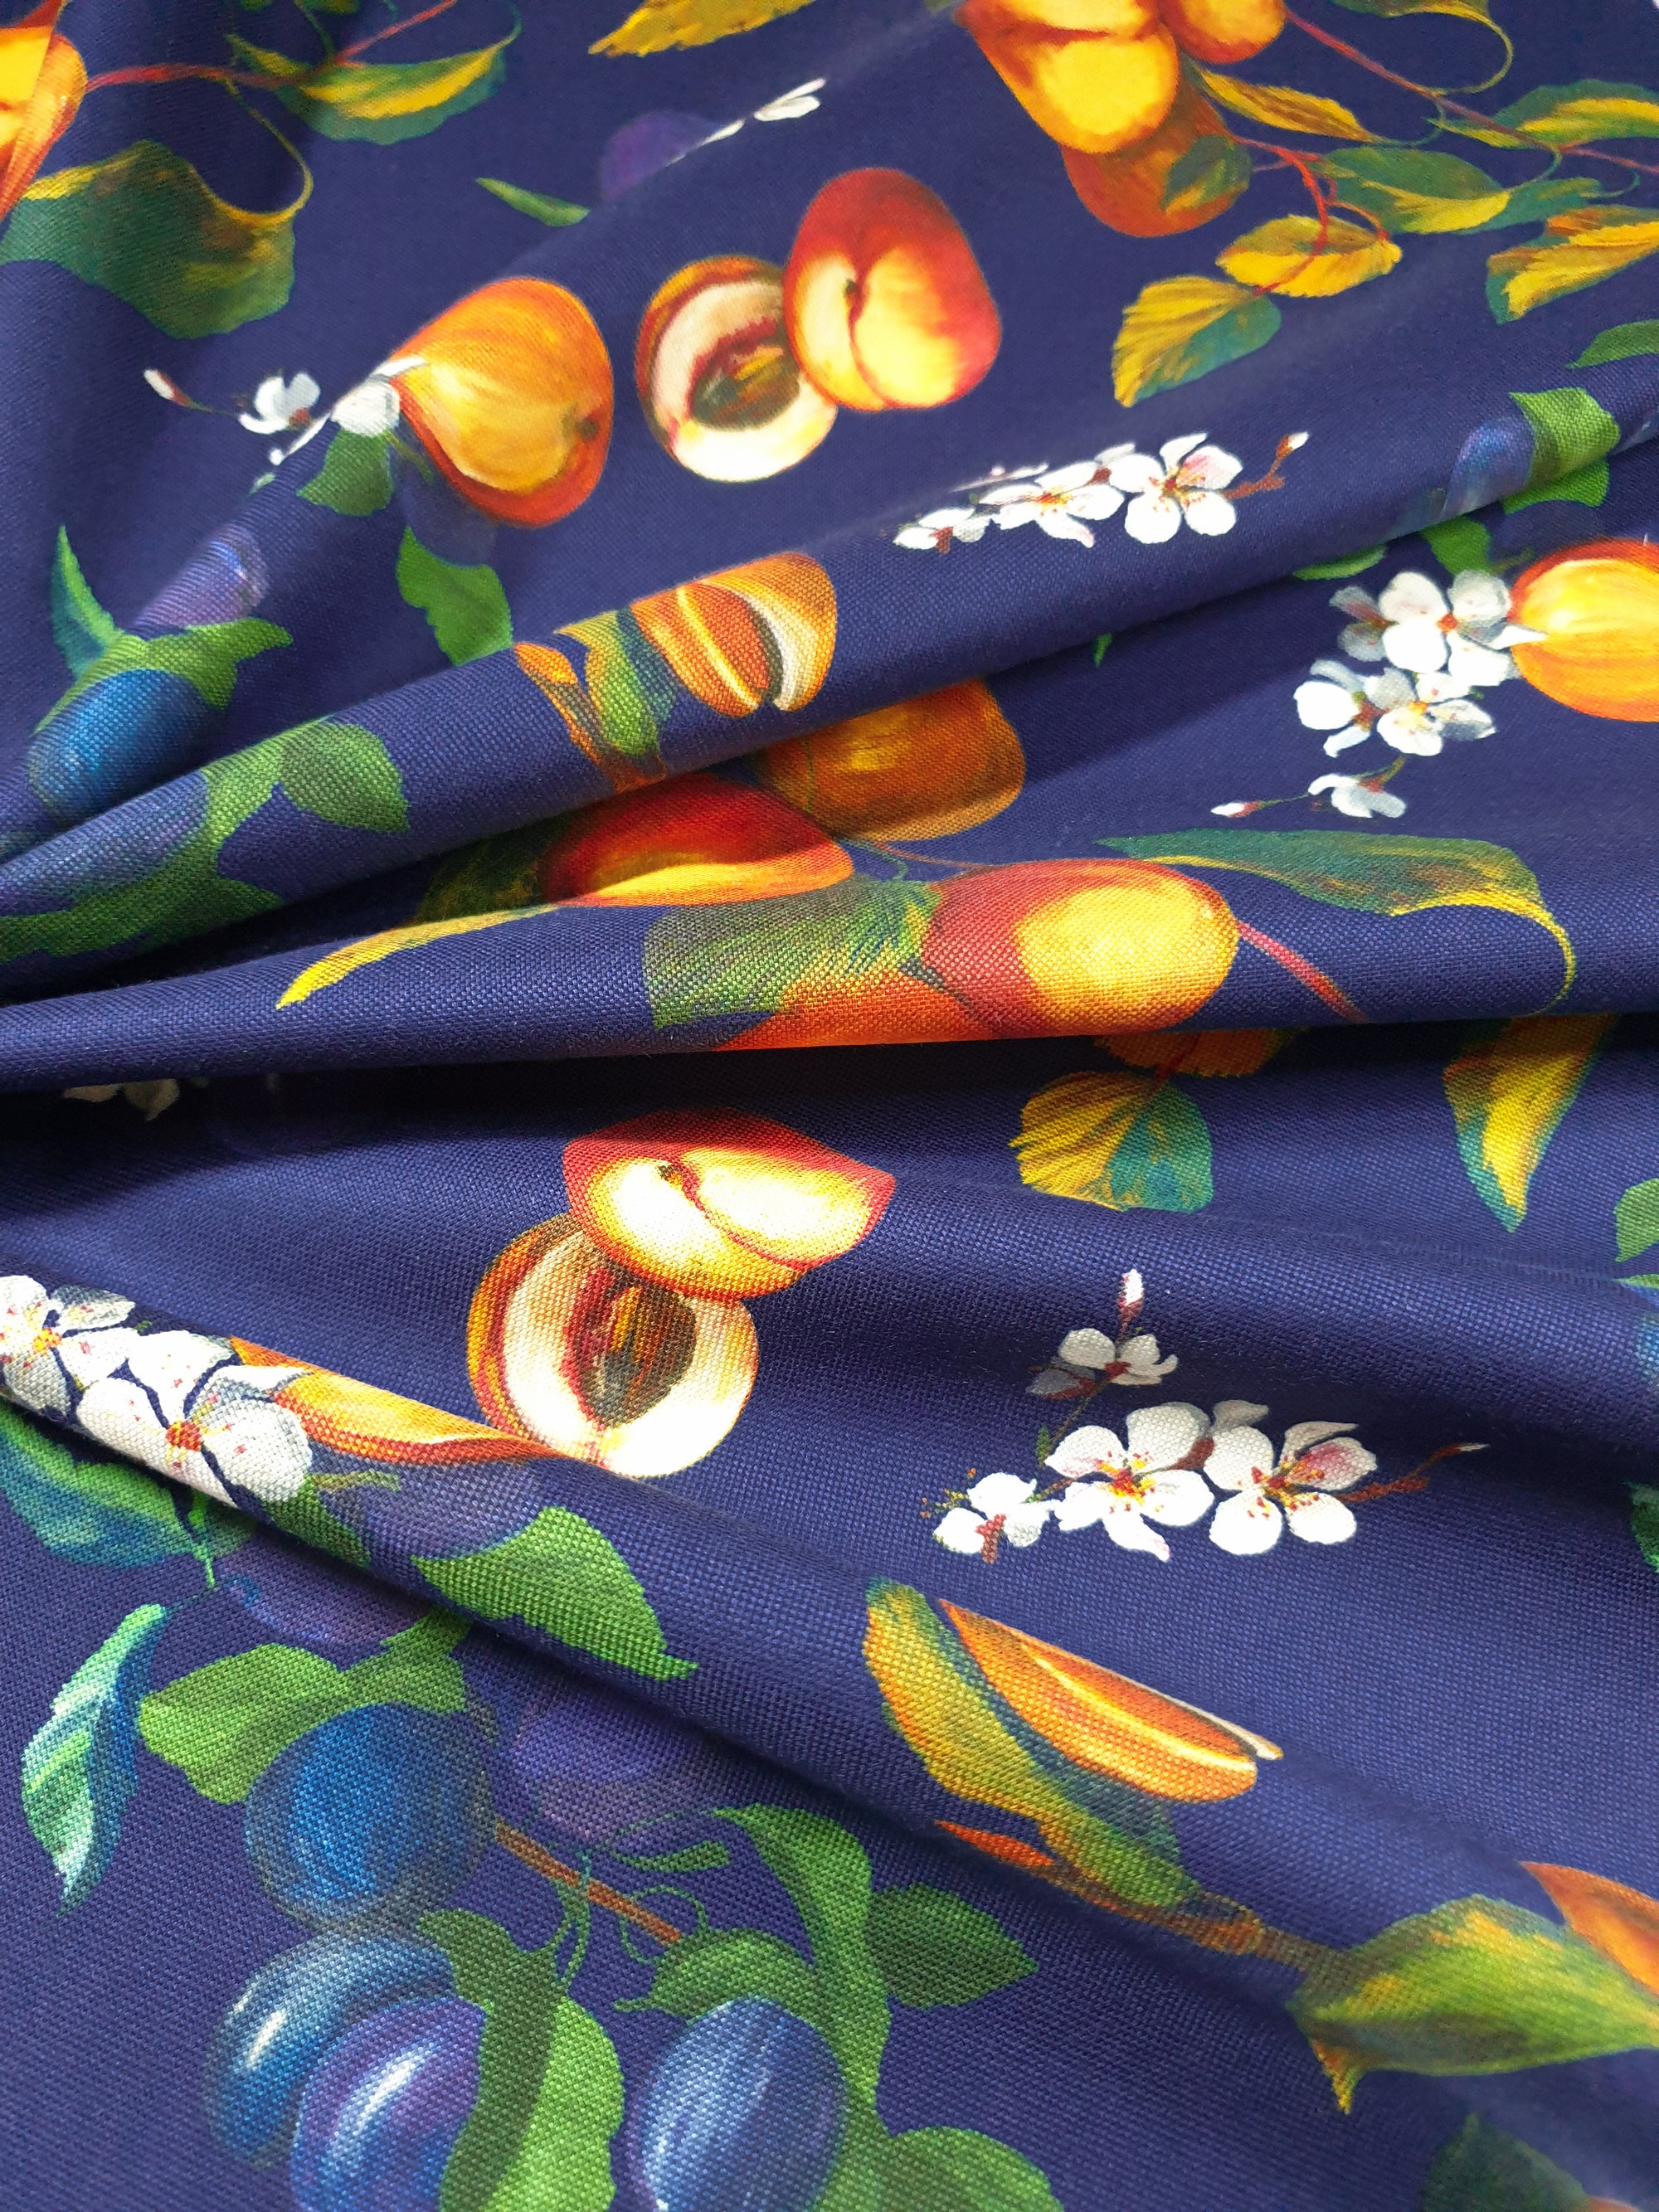 HUBERROSS 100% Oxford Panama Cotton Prints   Cloth Made In Italy  Width: 58'' / 150cm